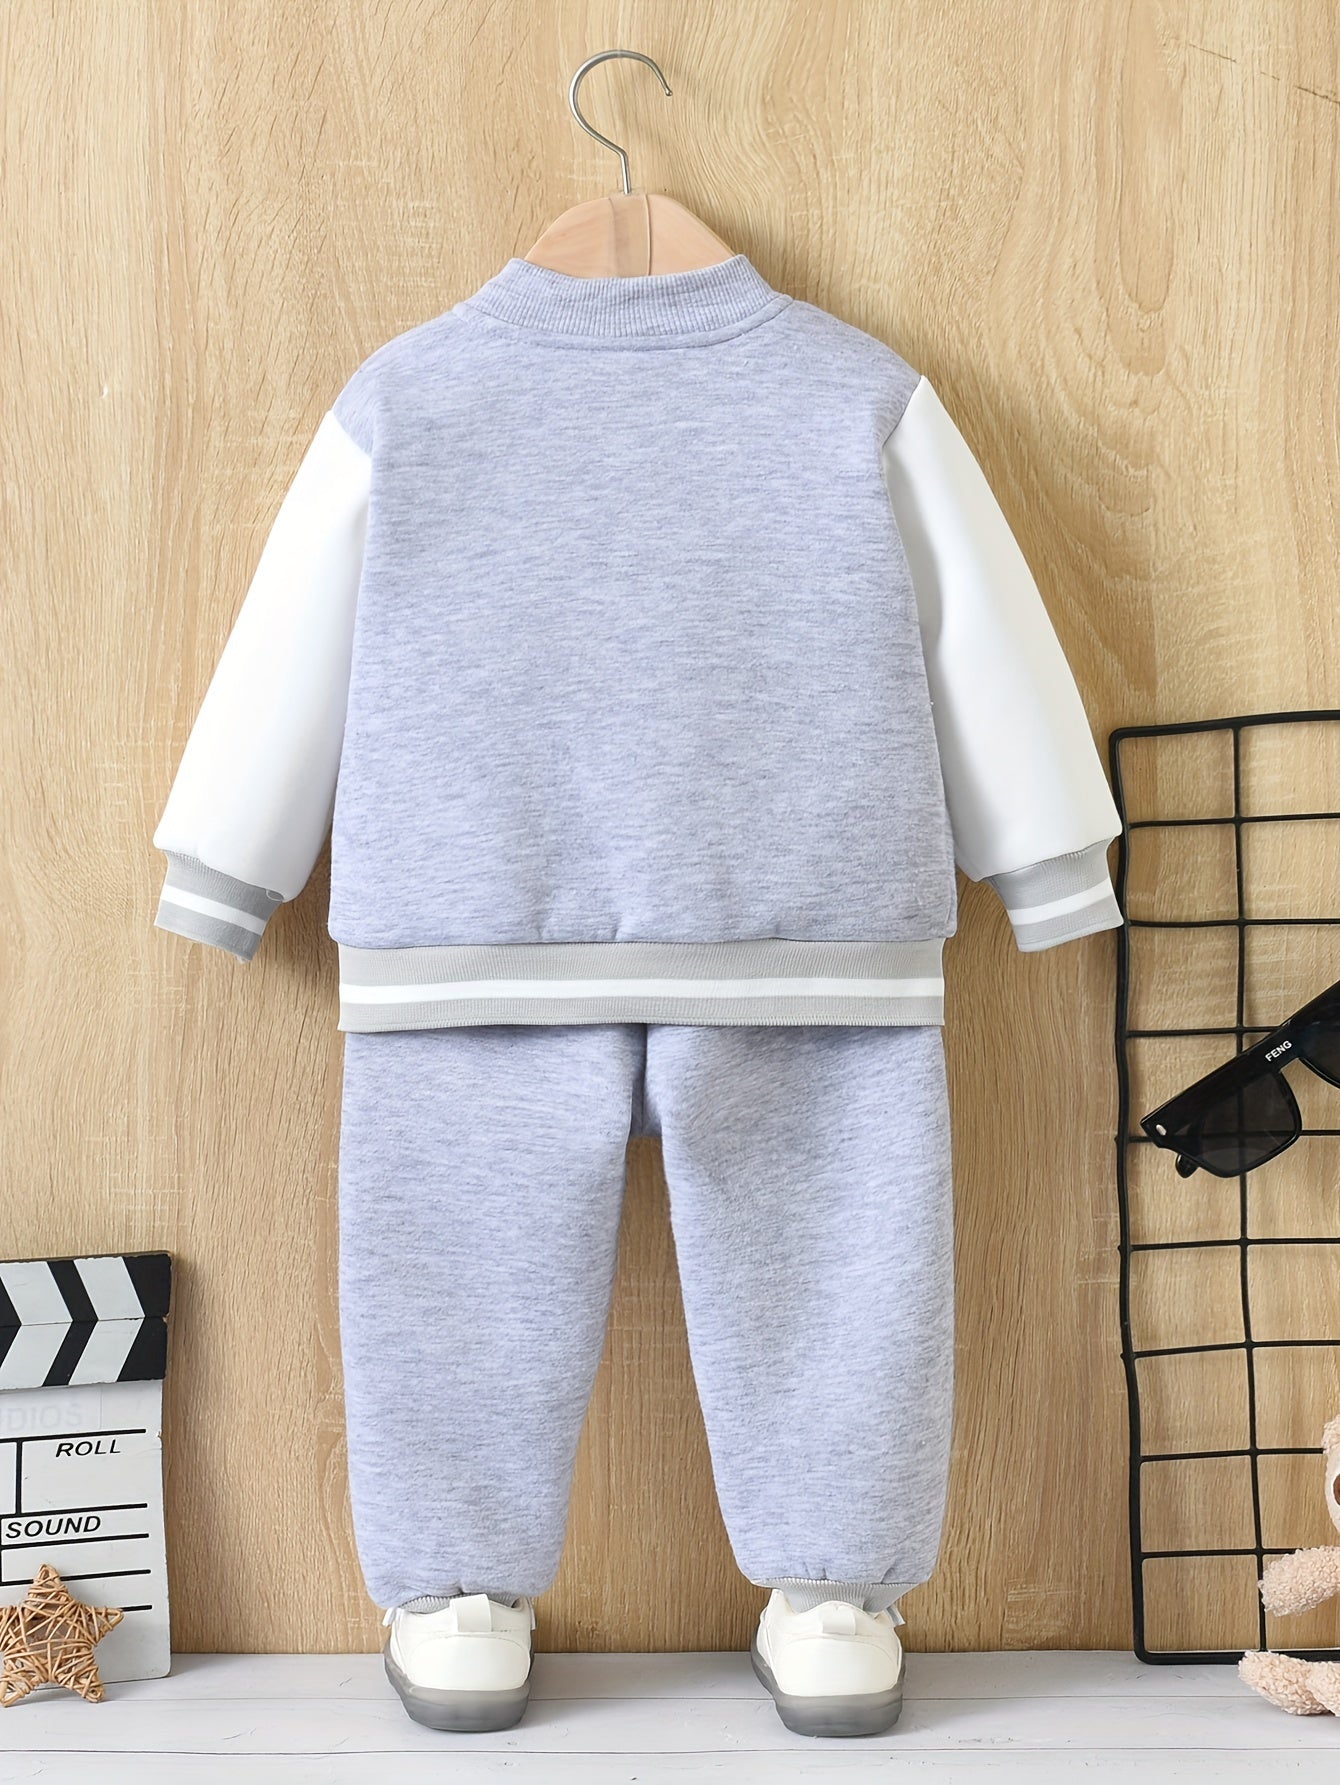 Baby Boys Autumn Winter New Stylish Outfits, Sports Baseball Coat Top Trousers Set Kids Clothes